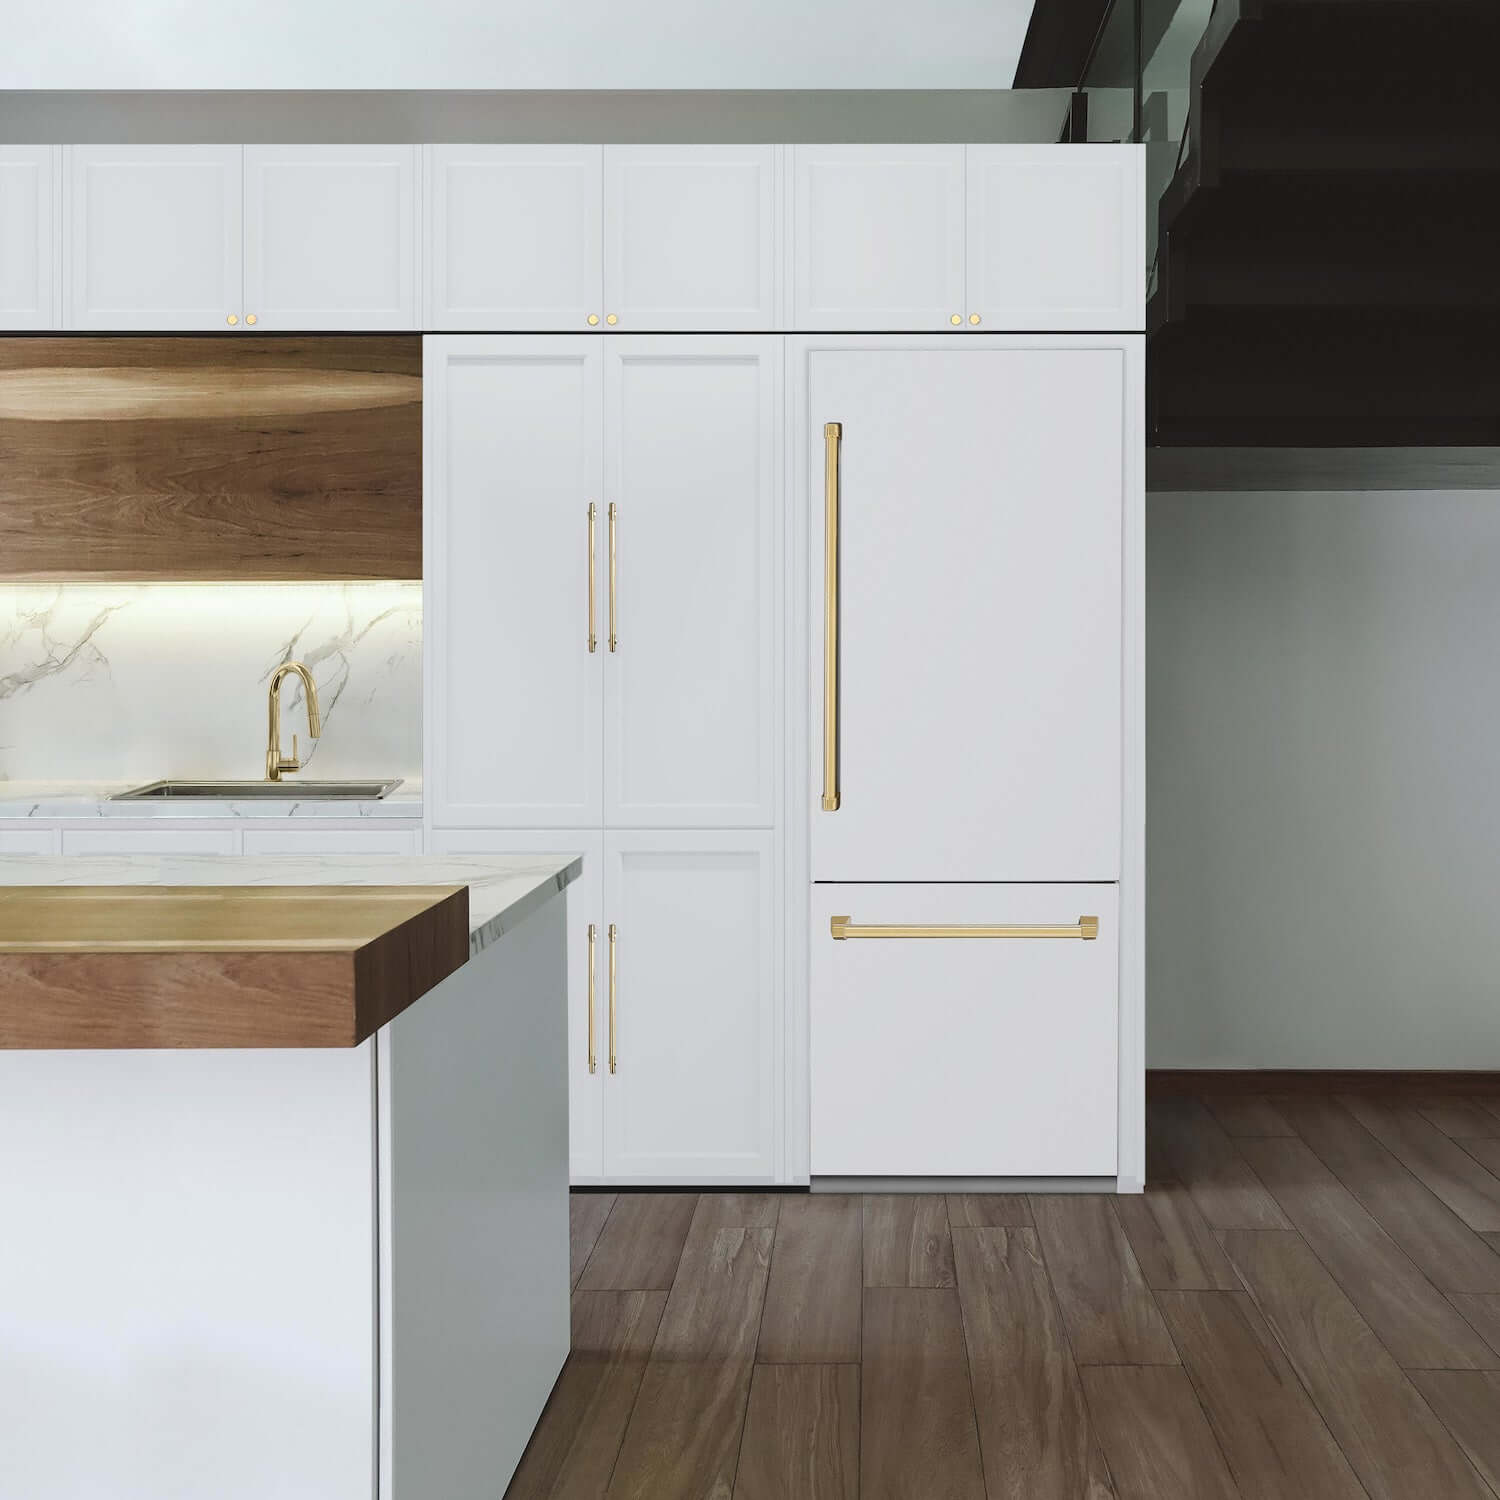 ZLINE Autograph Edition Built-in Refrigerator with White Matte Panels and Accent Handles in a luxury kitchen.